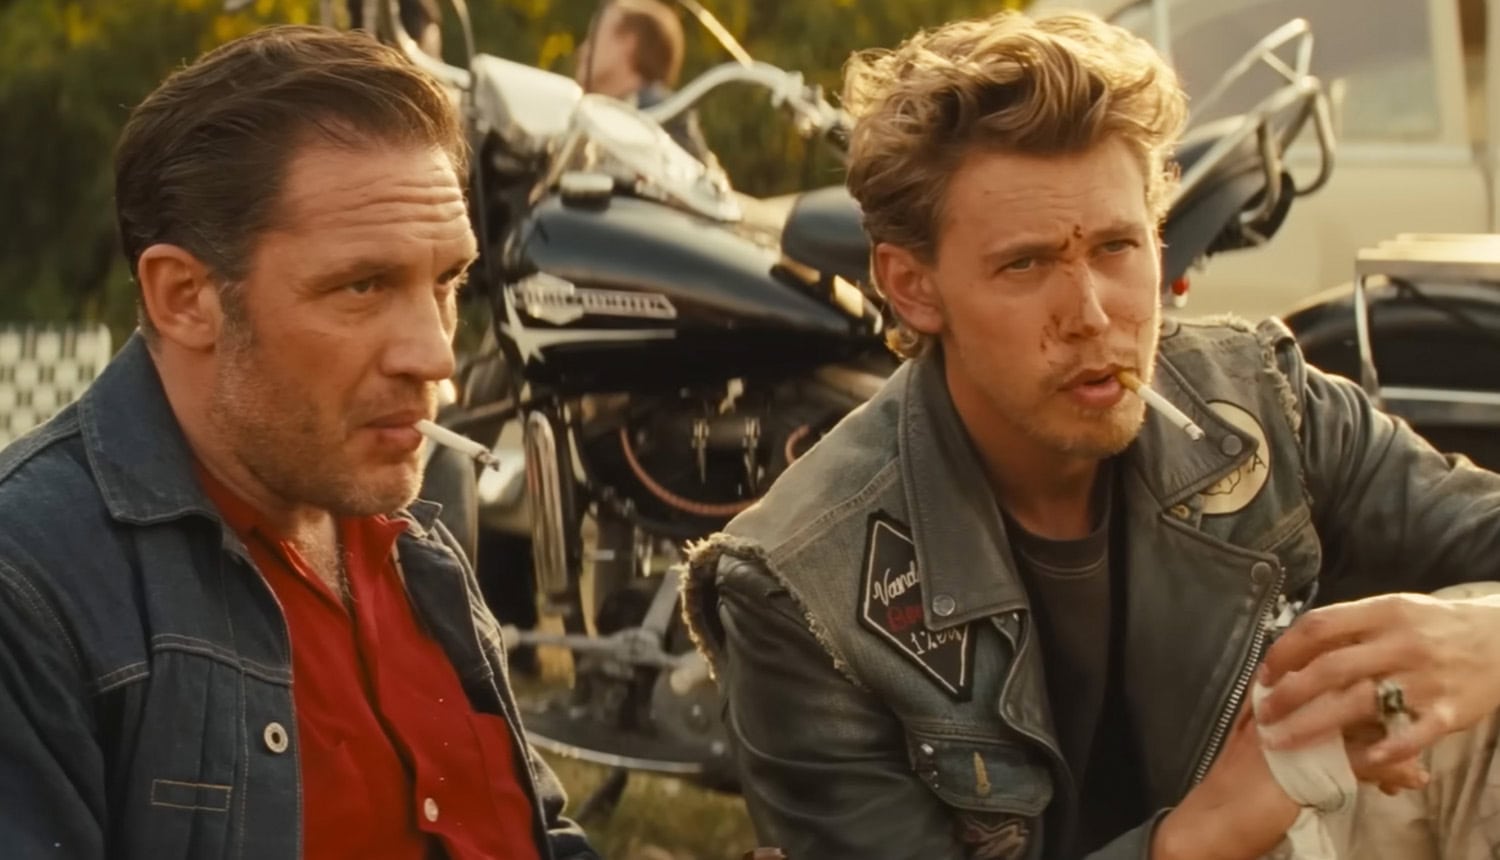 Star-Studded Cast Brings The Bikeriders to Life in a Riveting New Film